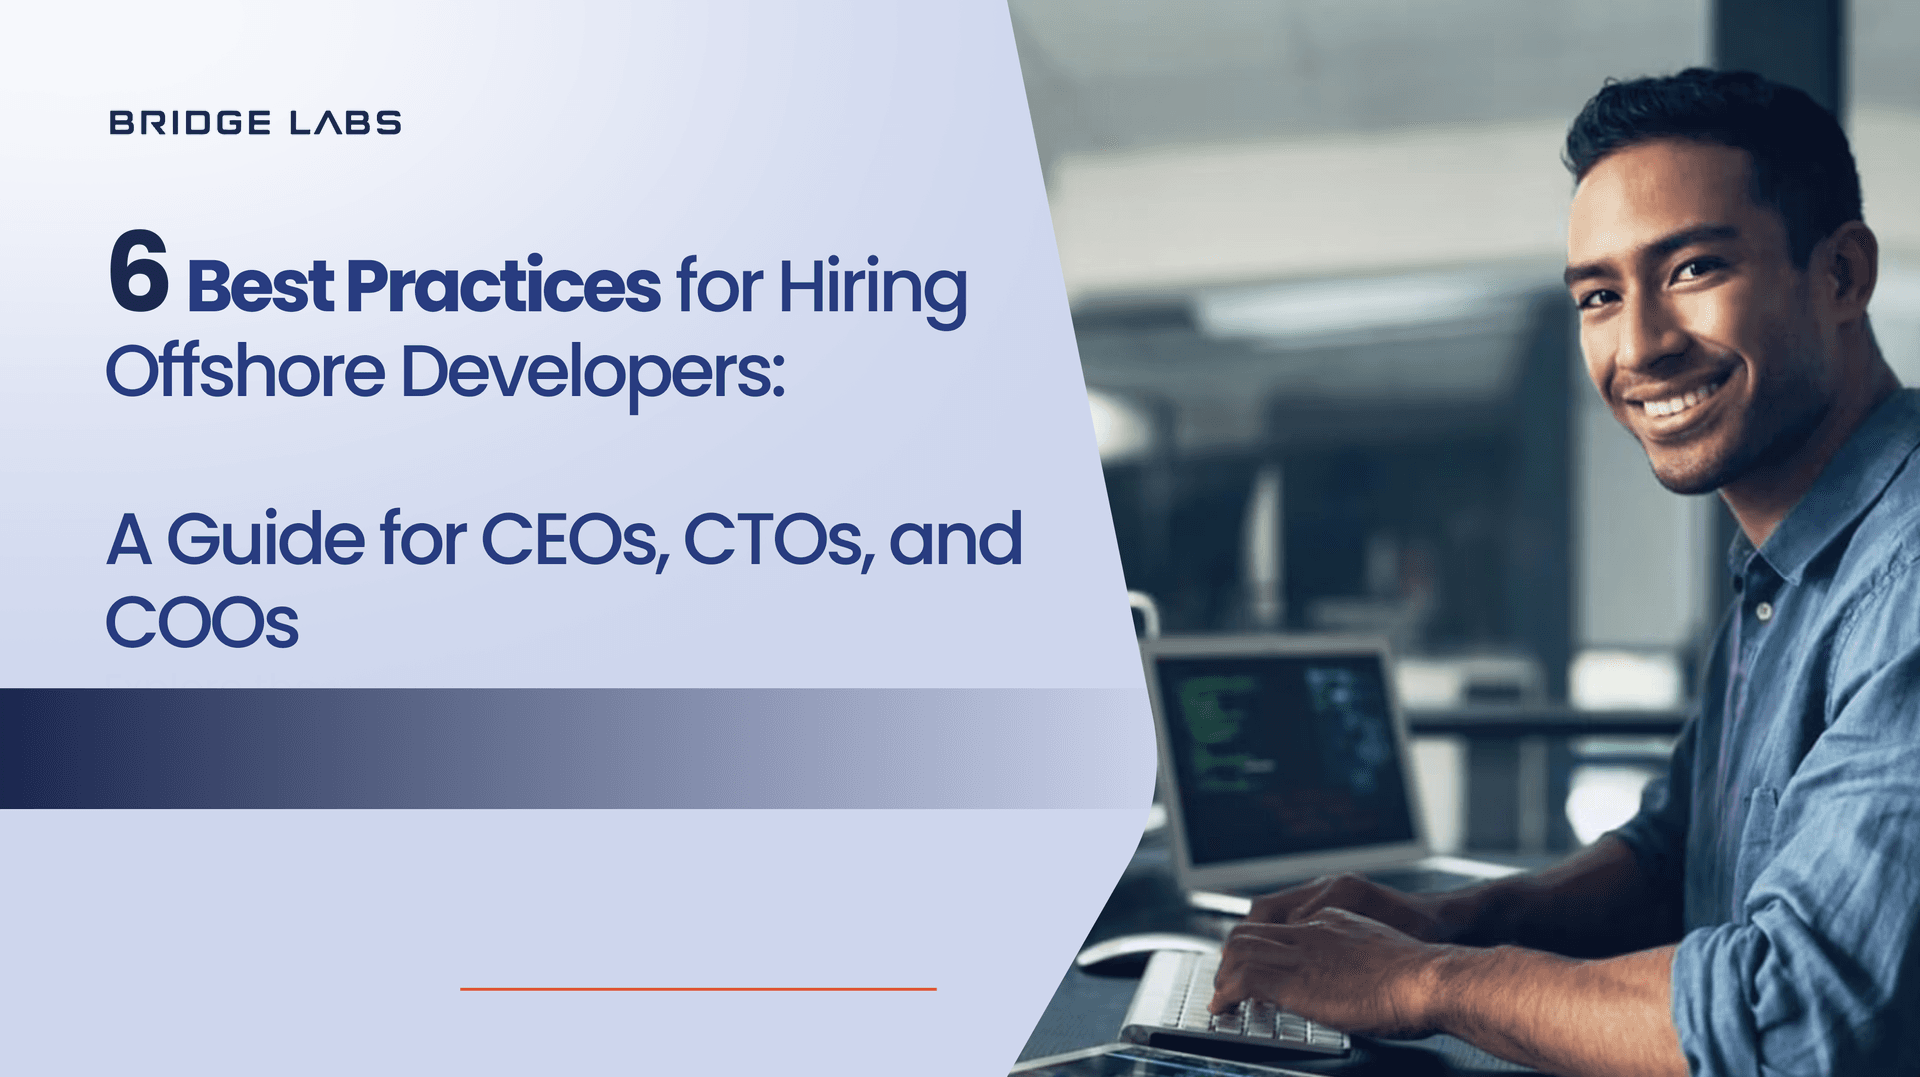 6 Best Practices for Hiring Offshore Developers: A Guide for CEOs, CTOs, and COOs